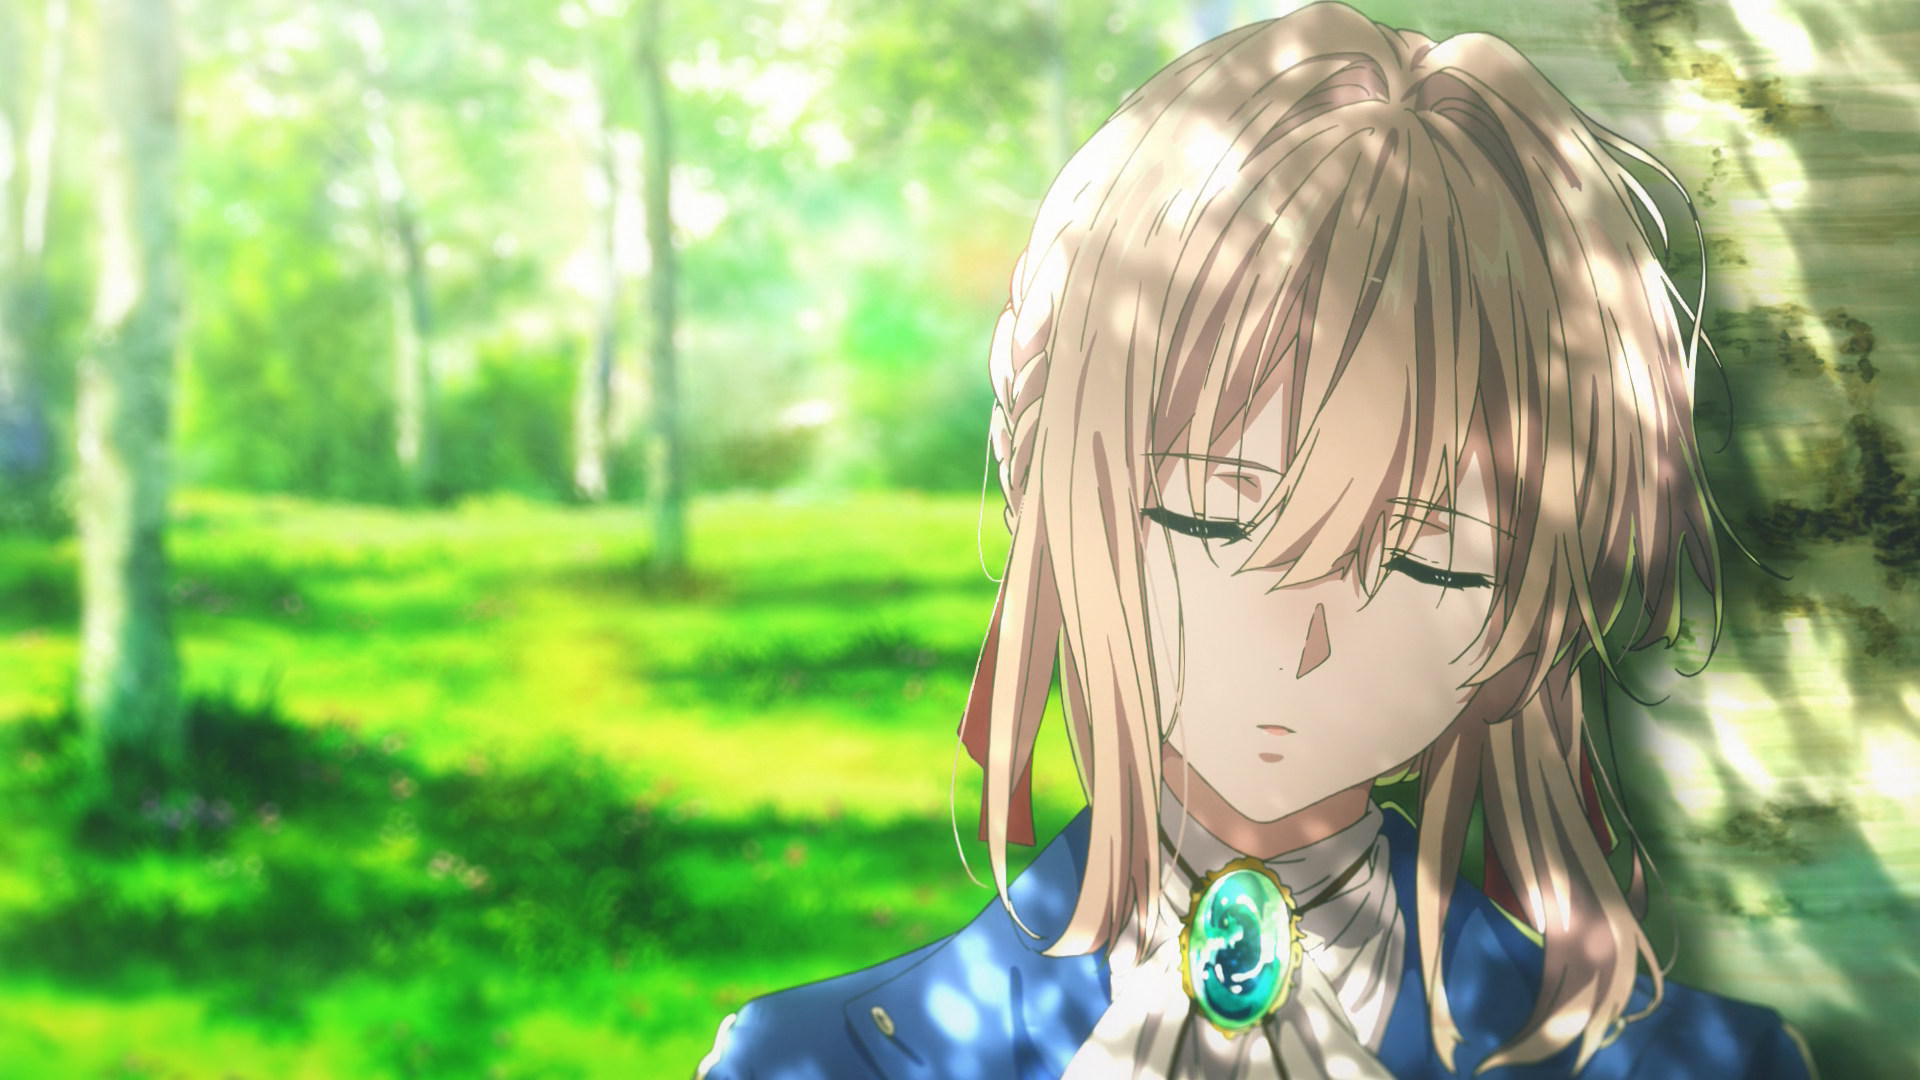 Violet Evergarden Character Violet Evergarden Blonde Sleeping Anime Girls Closed Eyes Trees Grass Na 1920x1080